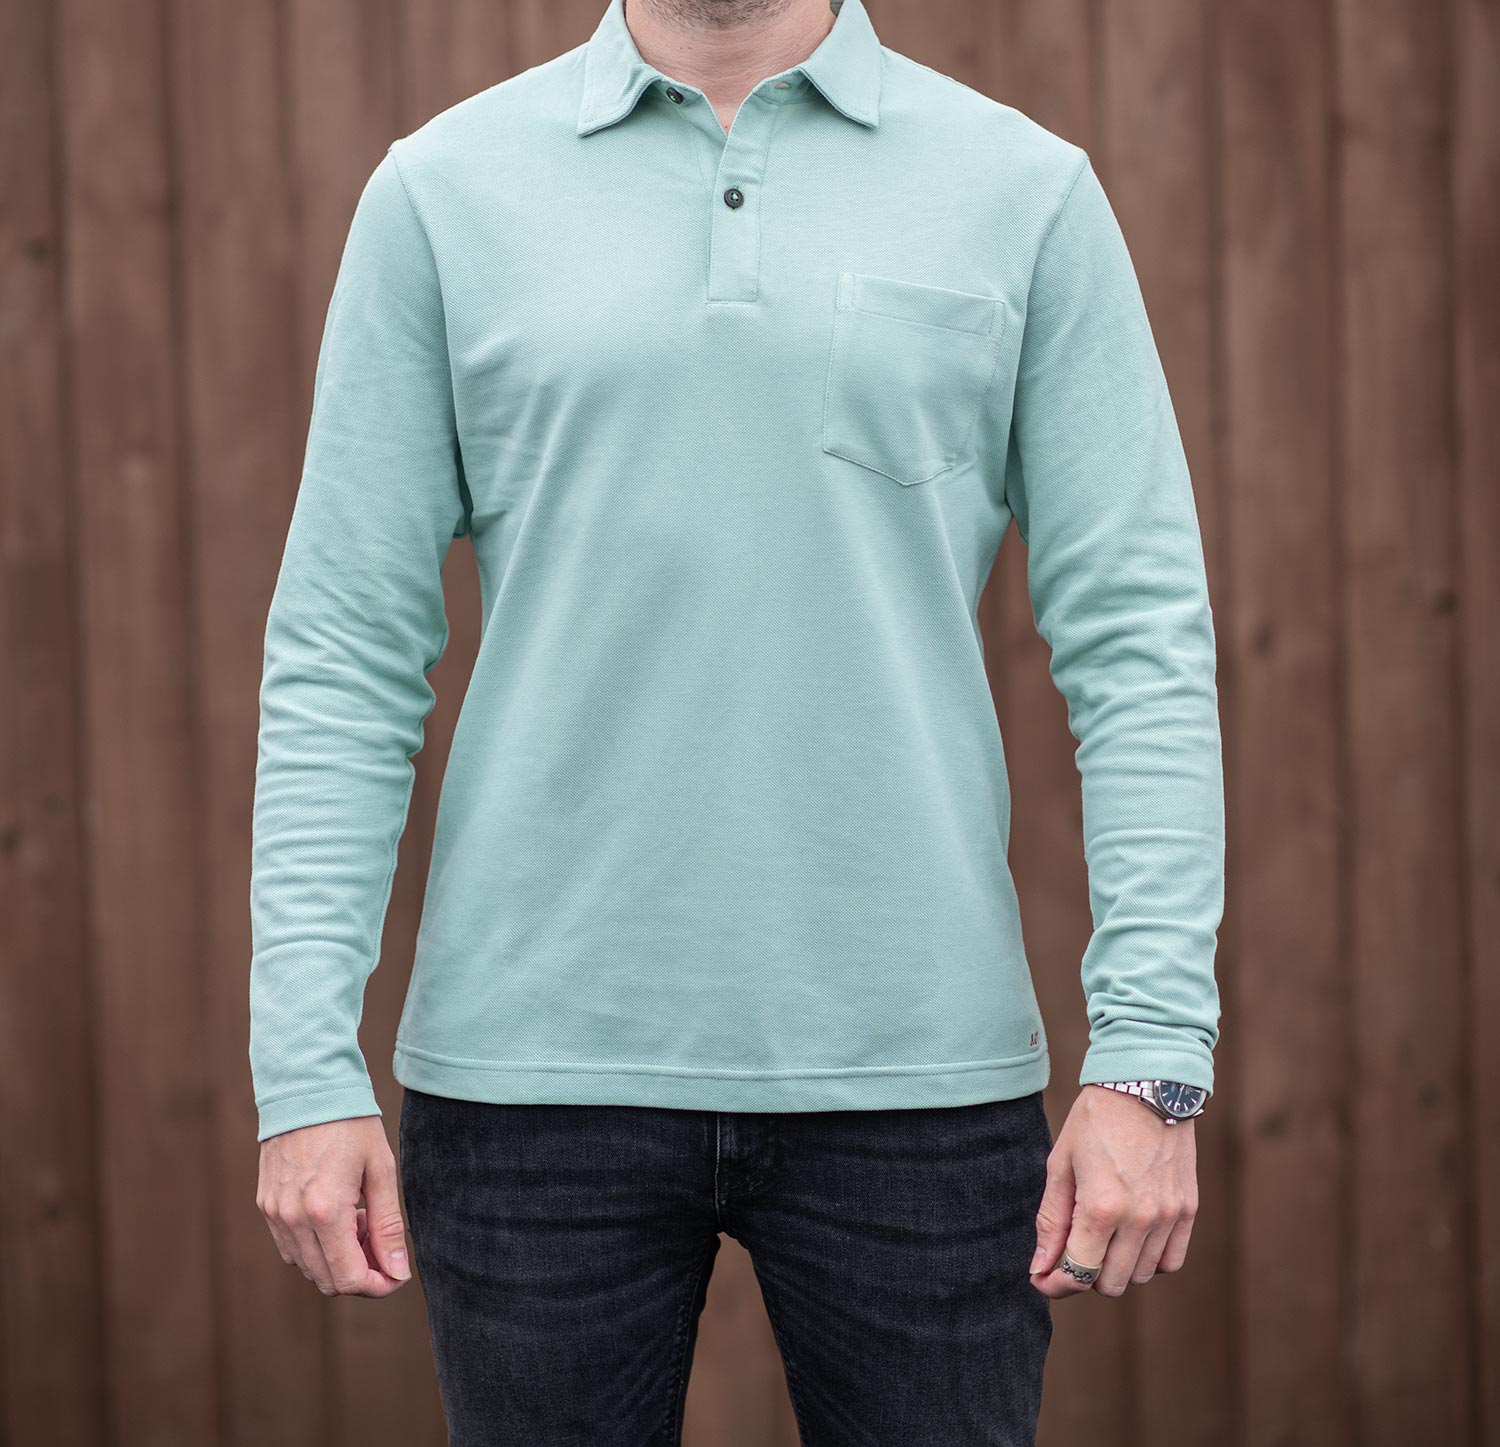 Tailor Polo Shirt Review | Your Average Guy